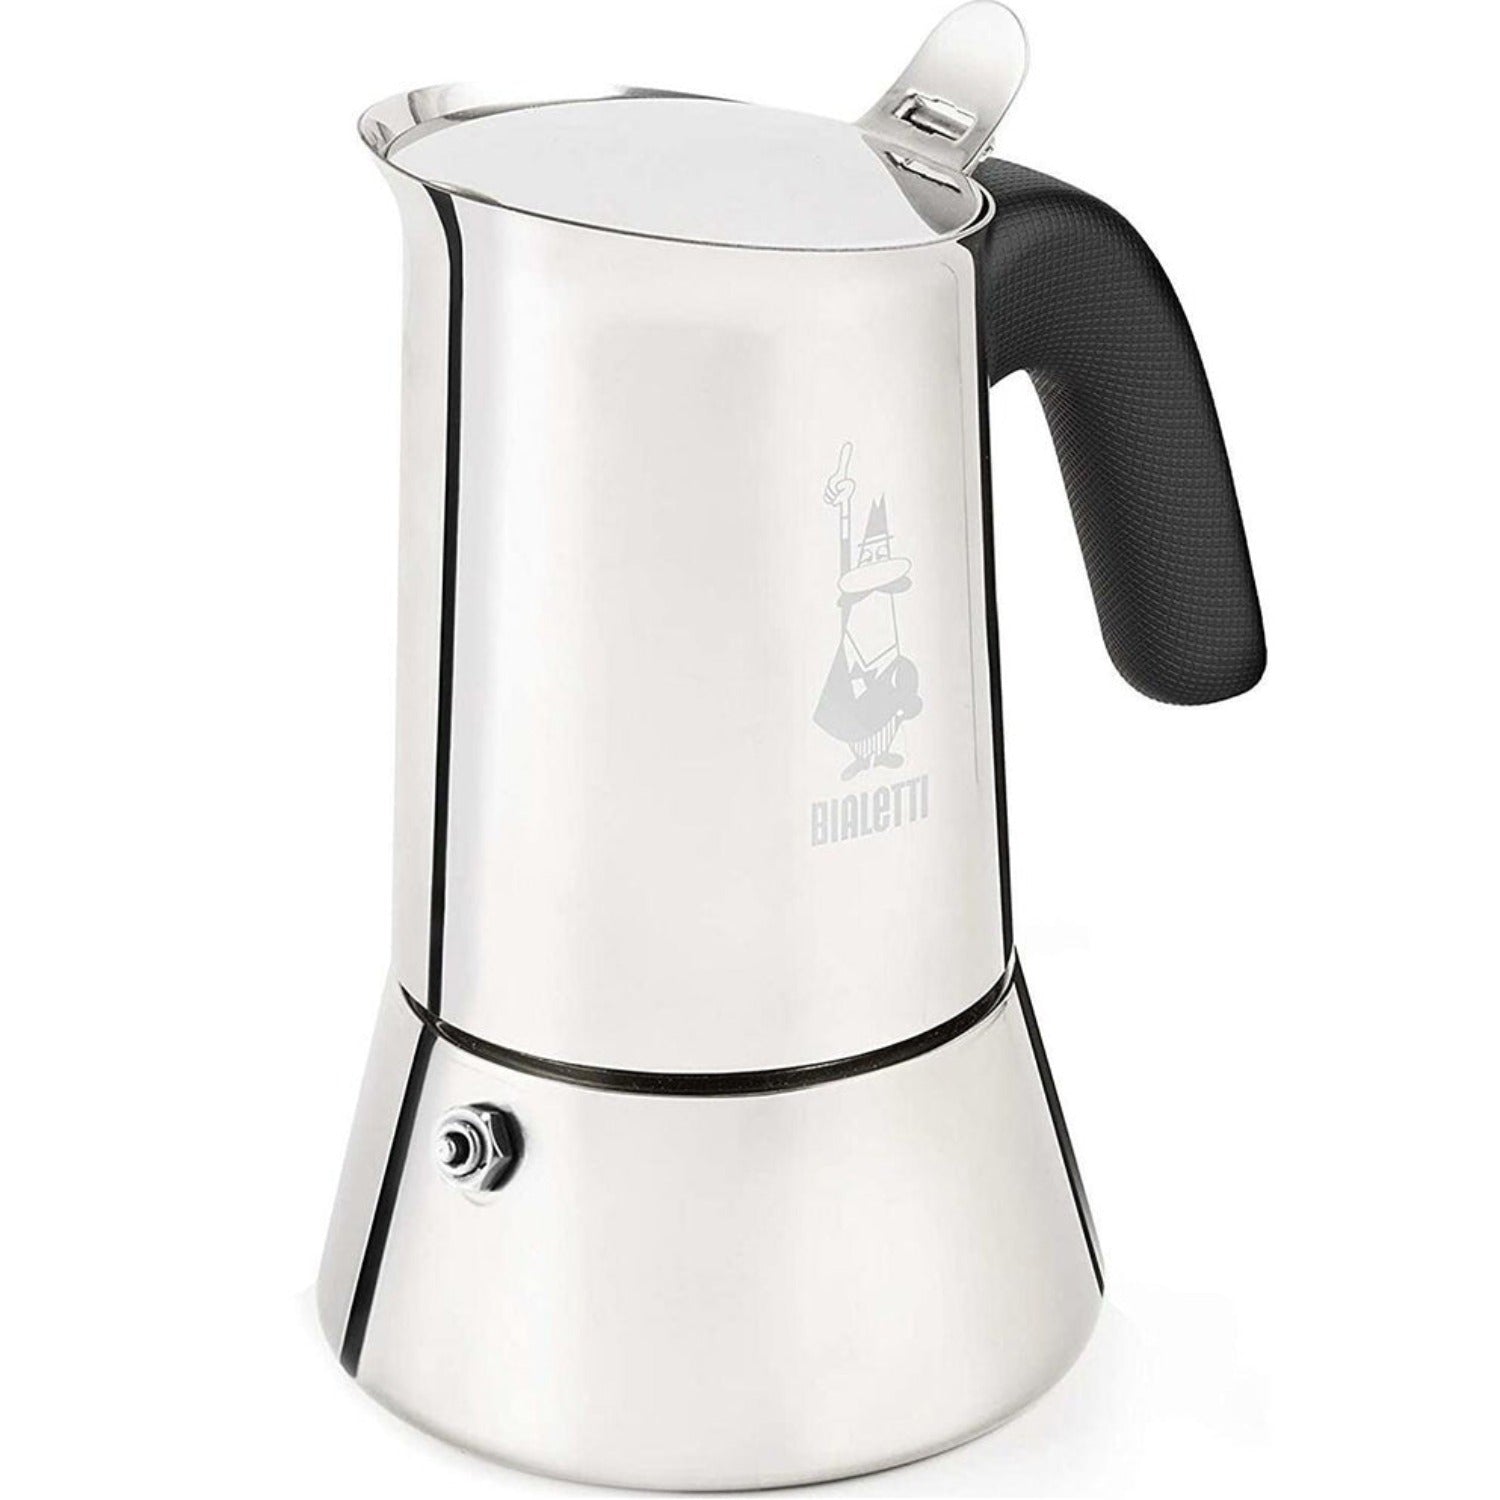 Bialetti 7255 Venus 6 Cup Induction Coffee Maker - Silver 2 Shaws Department Stores